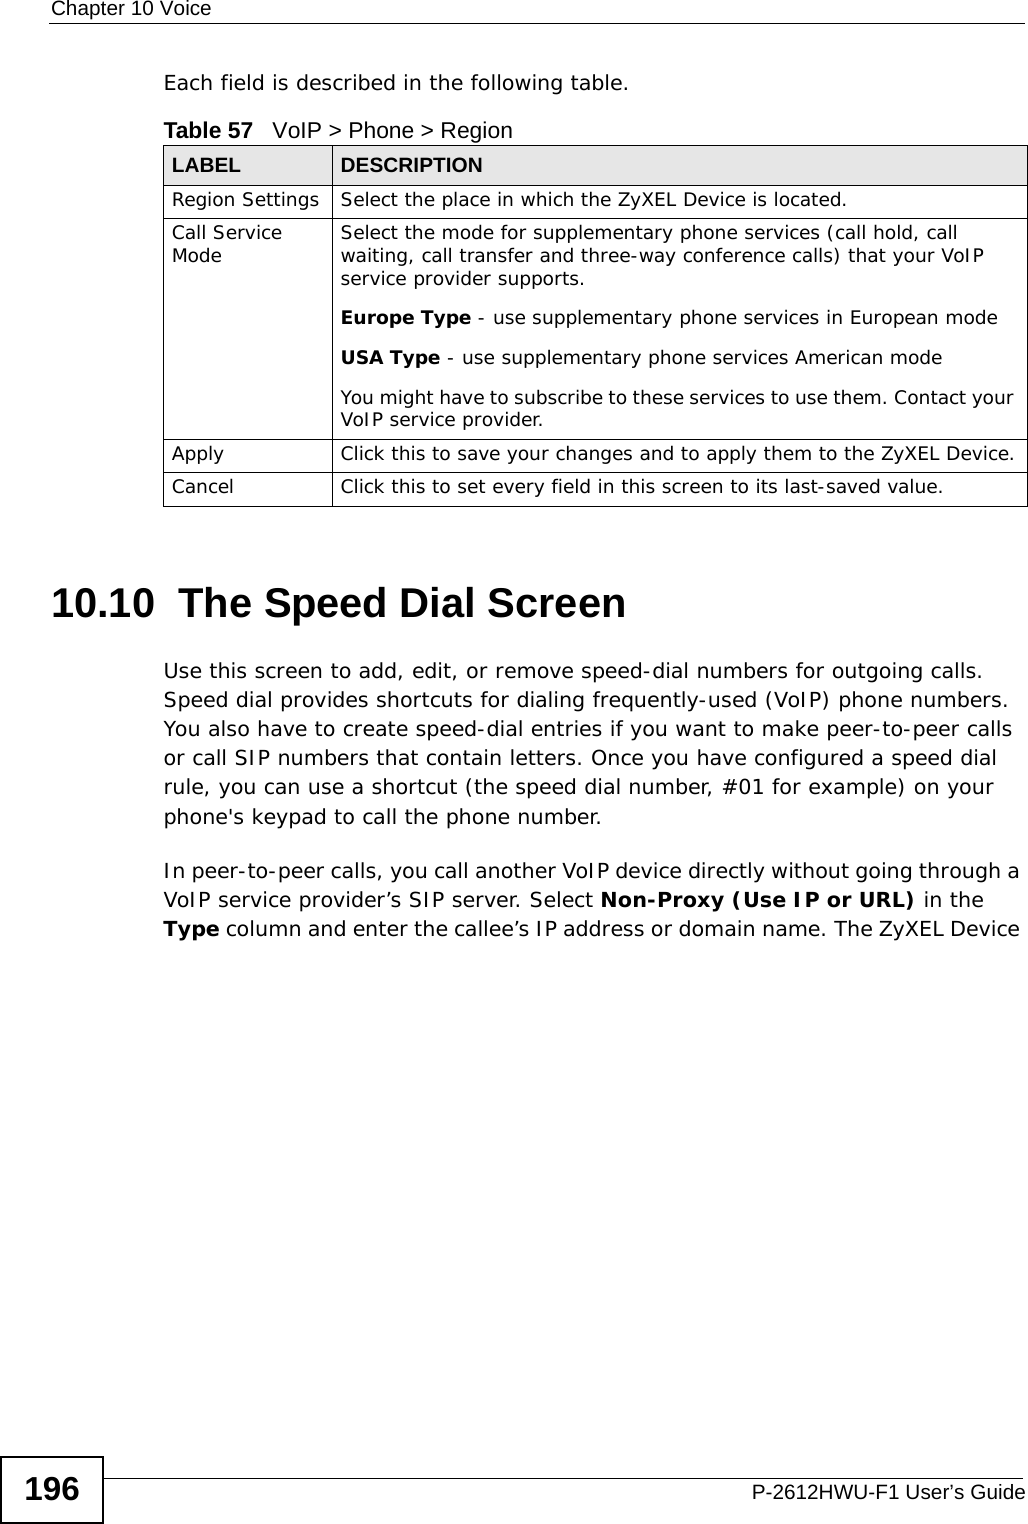 Chapter 10 VoiceP-2612HWU-F1 User’s Guide196Each field is described in the following table.10.10  The Speed Dial ScreenUse this screen to add, edit, or remove speed-dial numbers for outgoing calls. Speed dial provides shortcuts for dialing frequently-used (VoIP) phone numbers. You also have to create speed-dial entries if you want to make peer-to-peer calls or call SIP numbers that contain letters. Once you have configured a speed dial rule, you can use a shortcut (the speed dial number, #01 for example) on your phone&apos;s keypad to call the phone number.In peer-to-peer calls, you call another VoIP device directly without going through a VoIP service provider’s SIP server. Select Non-Proxy (Use IP or URL) in the Type column and enter the callee’s IP address or domain name. The ZyXEL Device Table 57   VoIP &gt; Phone &gt; RegionLABEL DESCRIPTIONRegion Settings Select the place in which the ZyXEL Device is located.Call Service Mode Select the mode for supplementary phone services (call hold, call waiting, call transfer and three-way conference calls) that your VoIP service provider supports.Europe Type - use supplementary phone services in European modeUSA Type - use supplementary phone services American modeYou might have to subscribe to these services to use them. Contact your VoIP service provider.Apply Click this to save your changes and to apply them to the ZyXEL Device.Cancel Click this to set every field in this screen to its last-saved value.